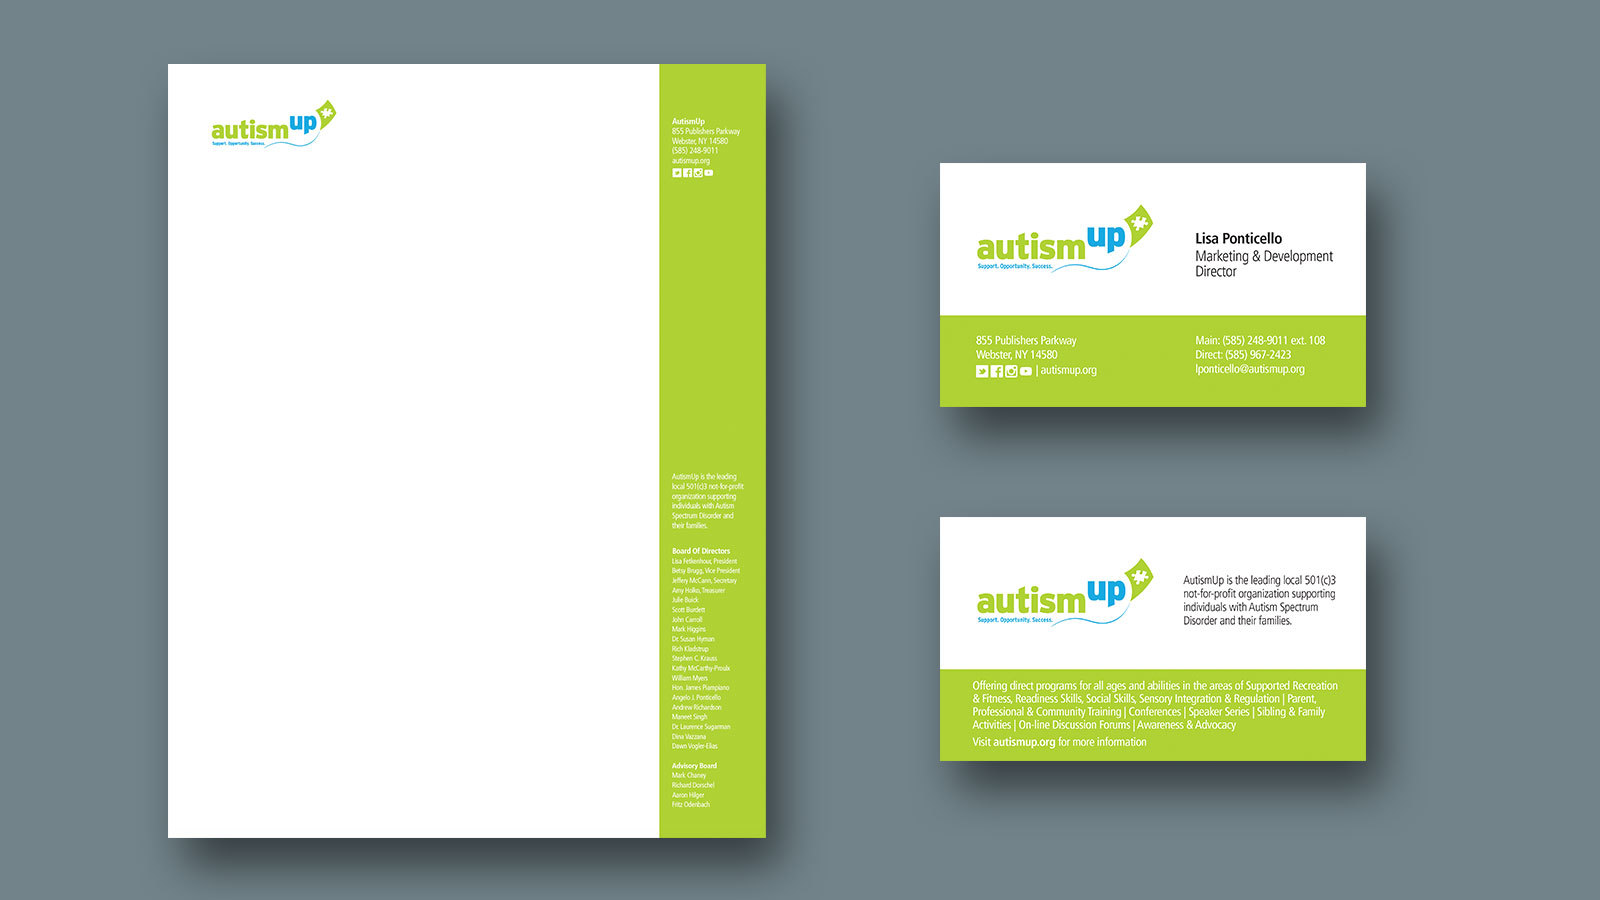 AutismUp Work Sample by Fazio Creative